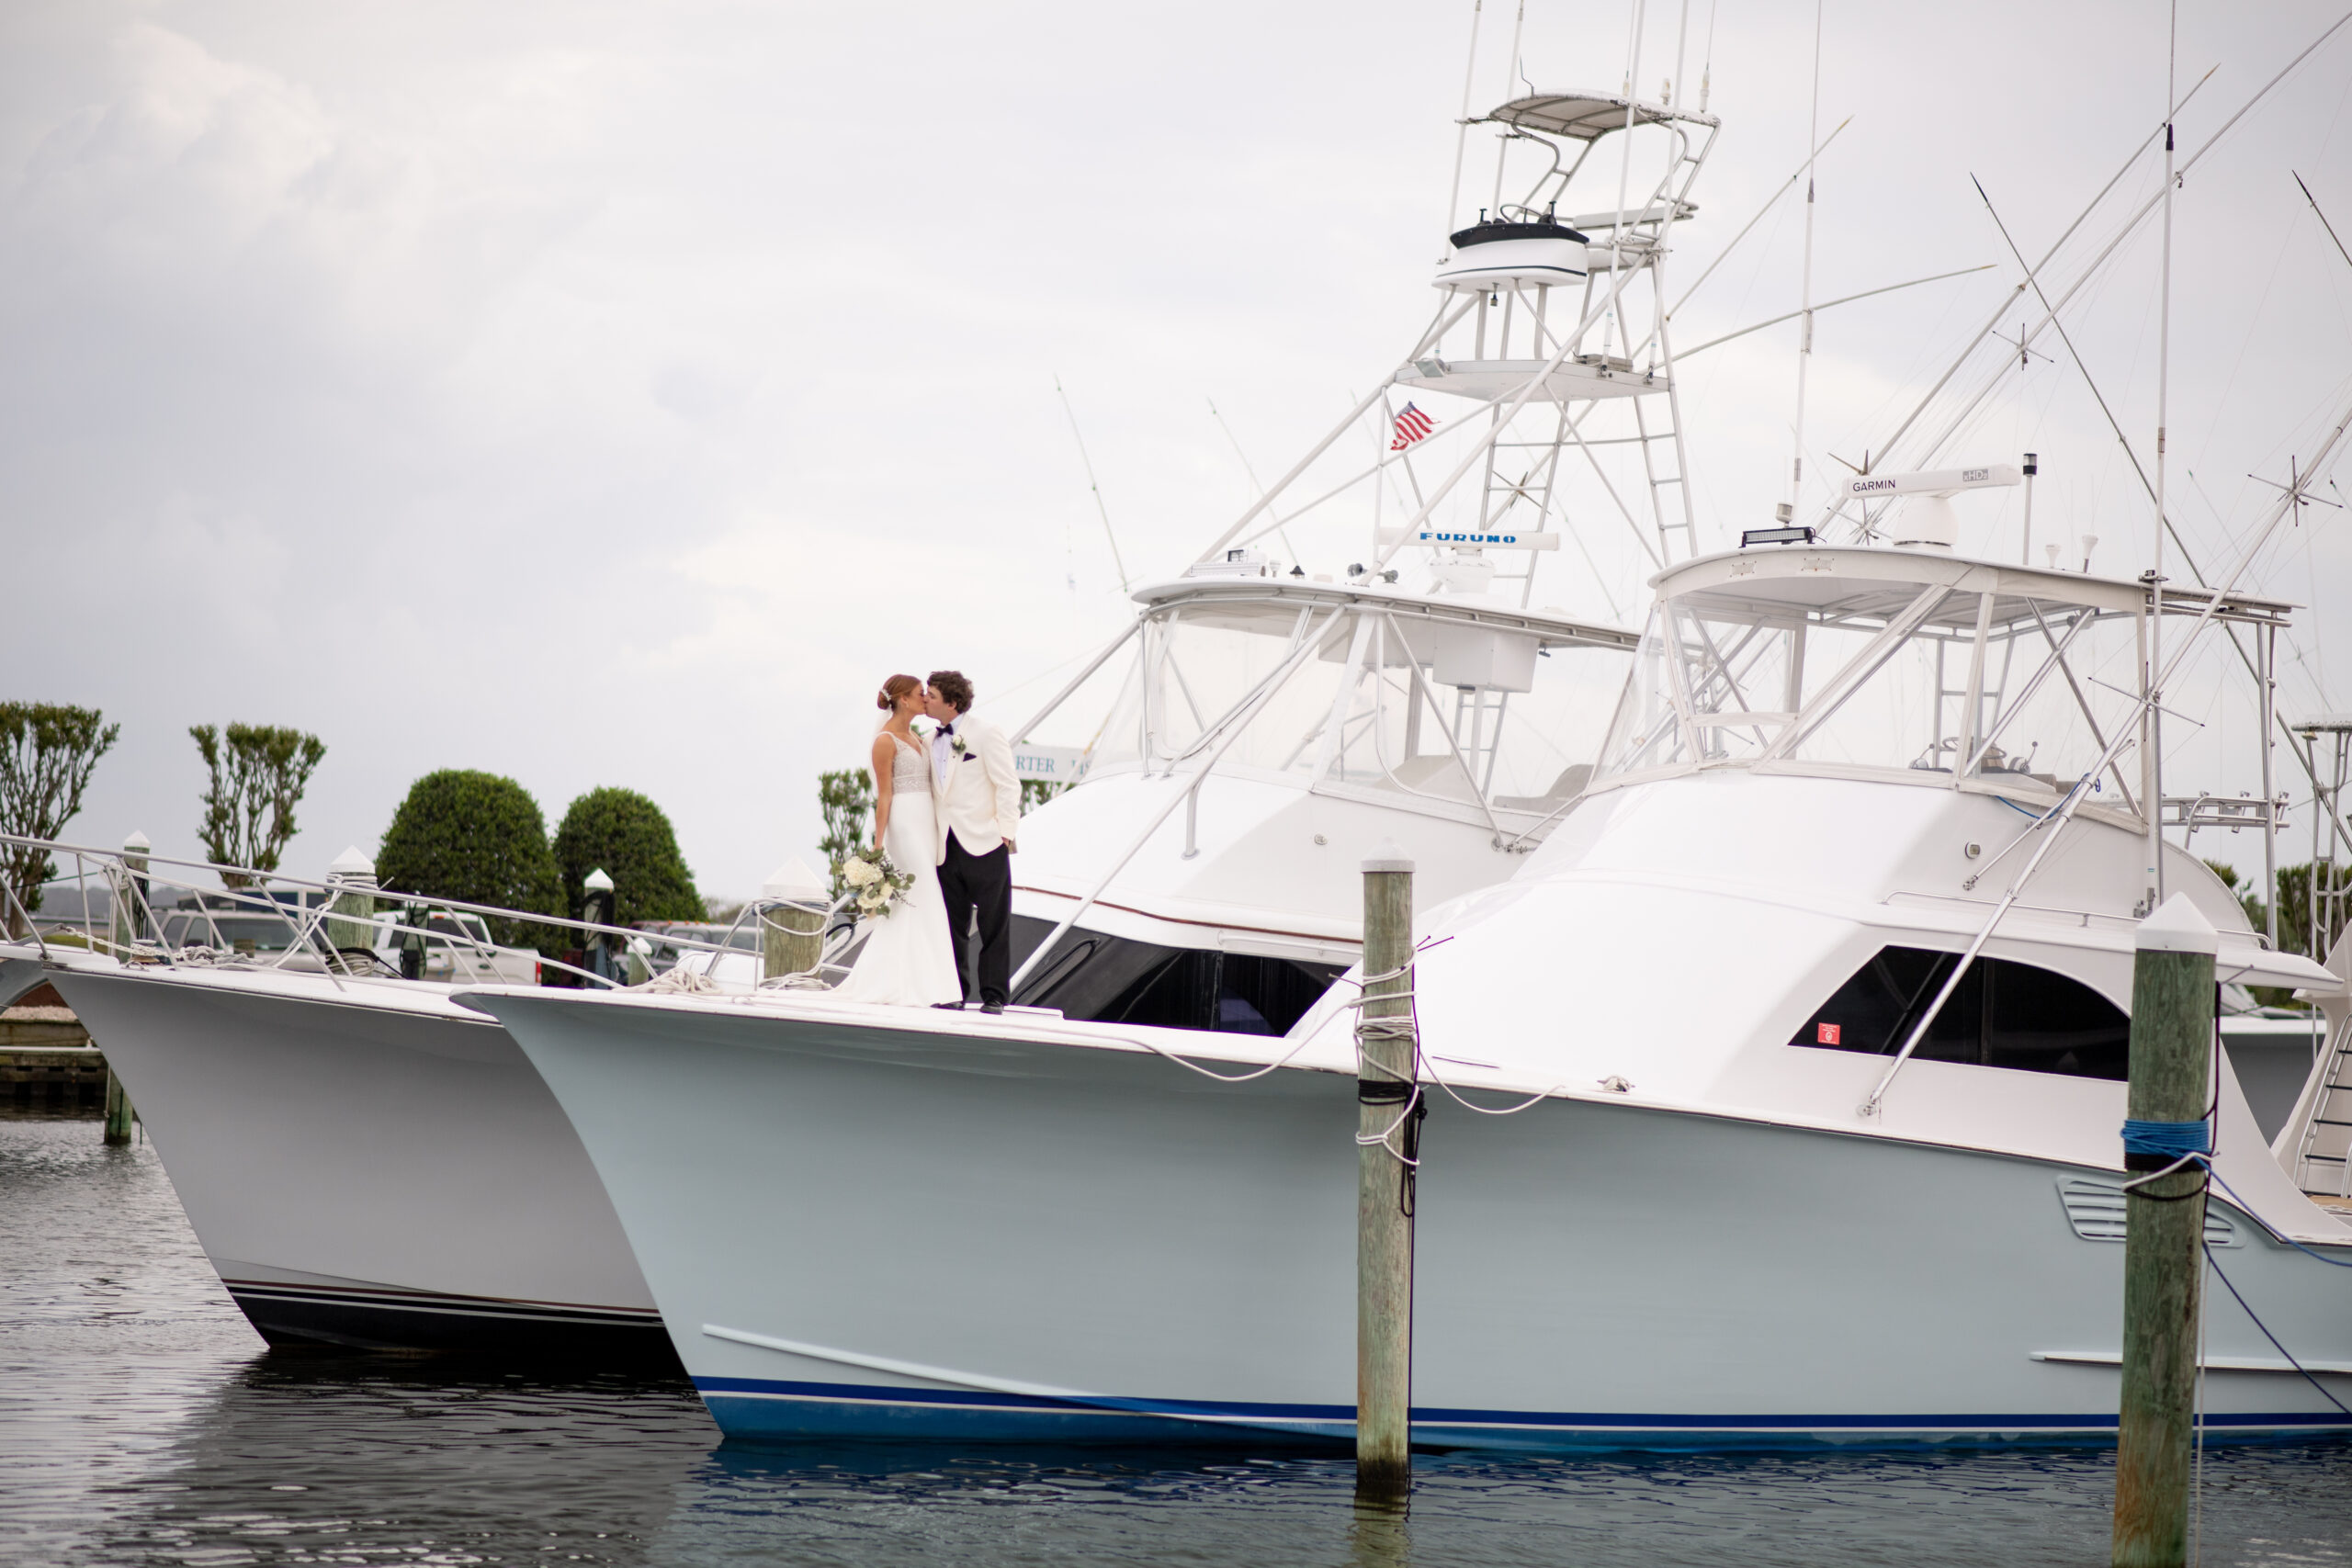 Bride and Groom kissing standing on fishing yacht at Pirate's Cove Marina in Manteo, NC on their wedding day.